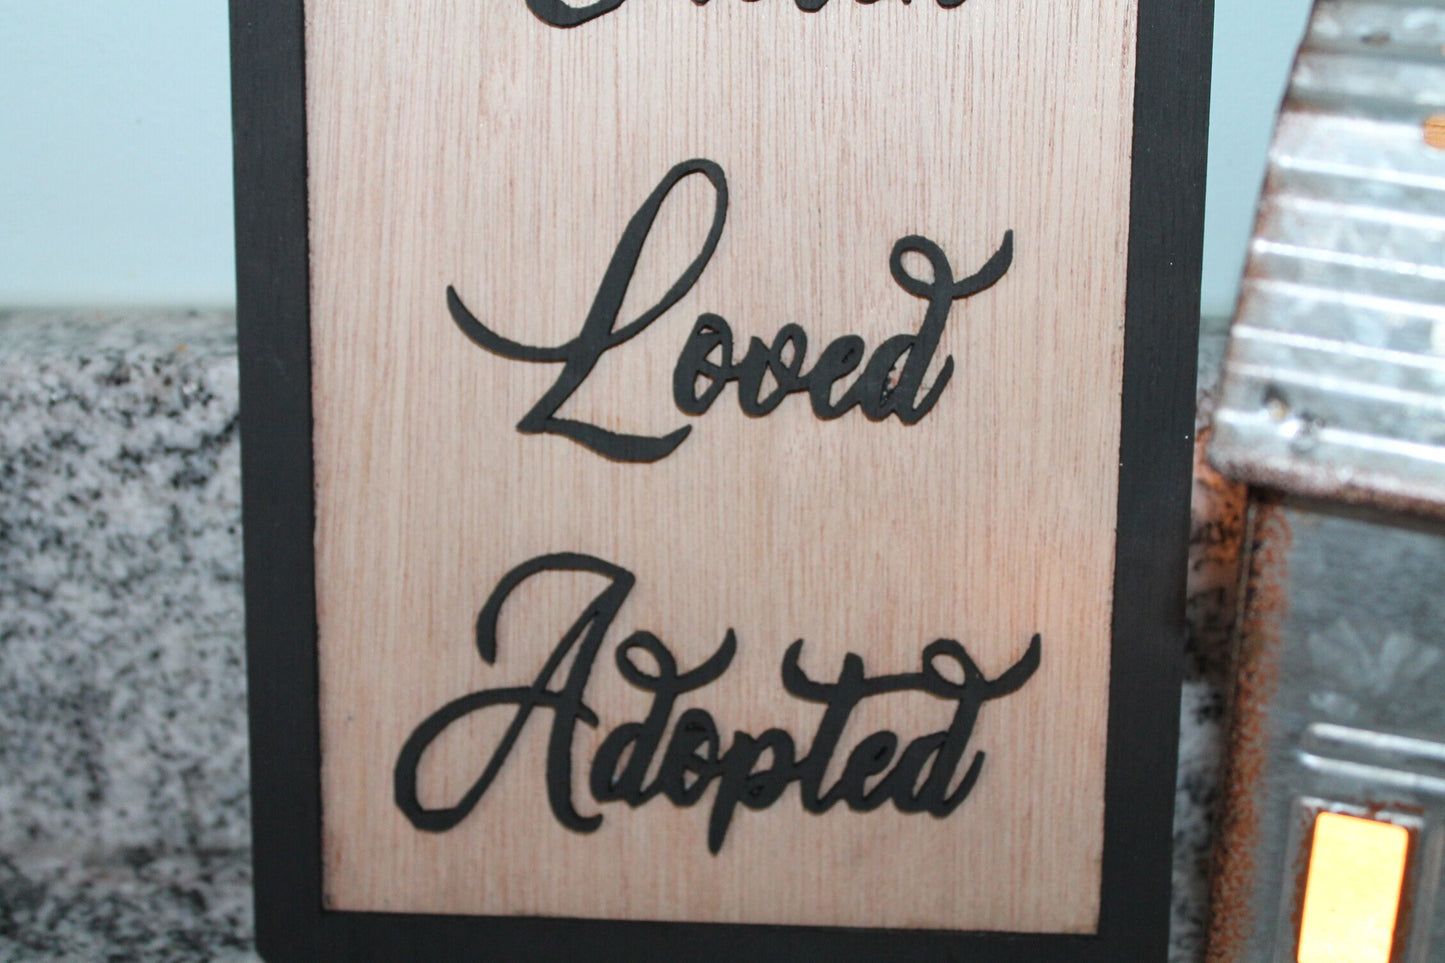 Adoption Sign, Wanted Chosen Loved Adopted, Gift, Wood Sign, Primitive, Farmhouse, Shabby Chic, 3D, Raised Text, Wall Decor